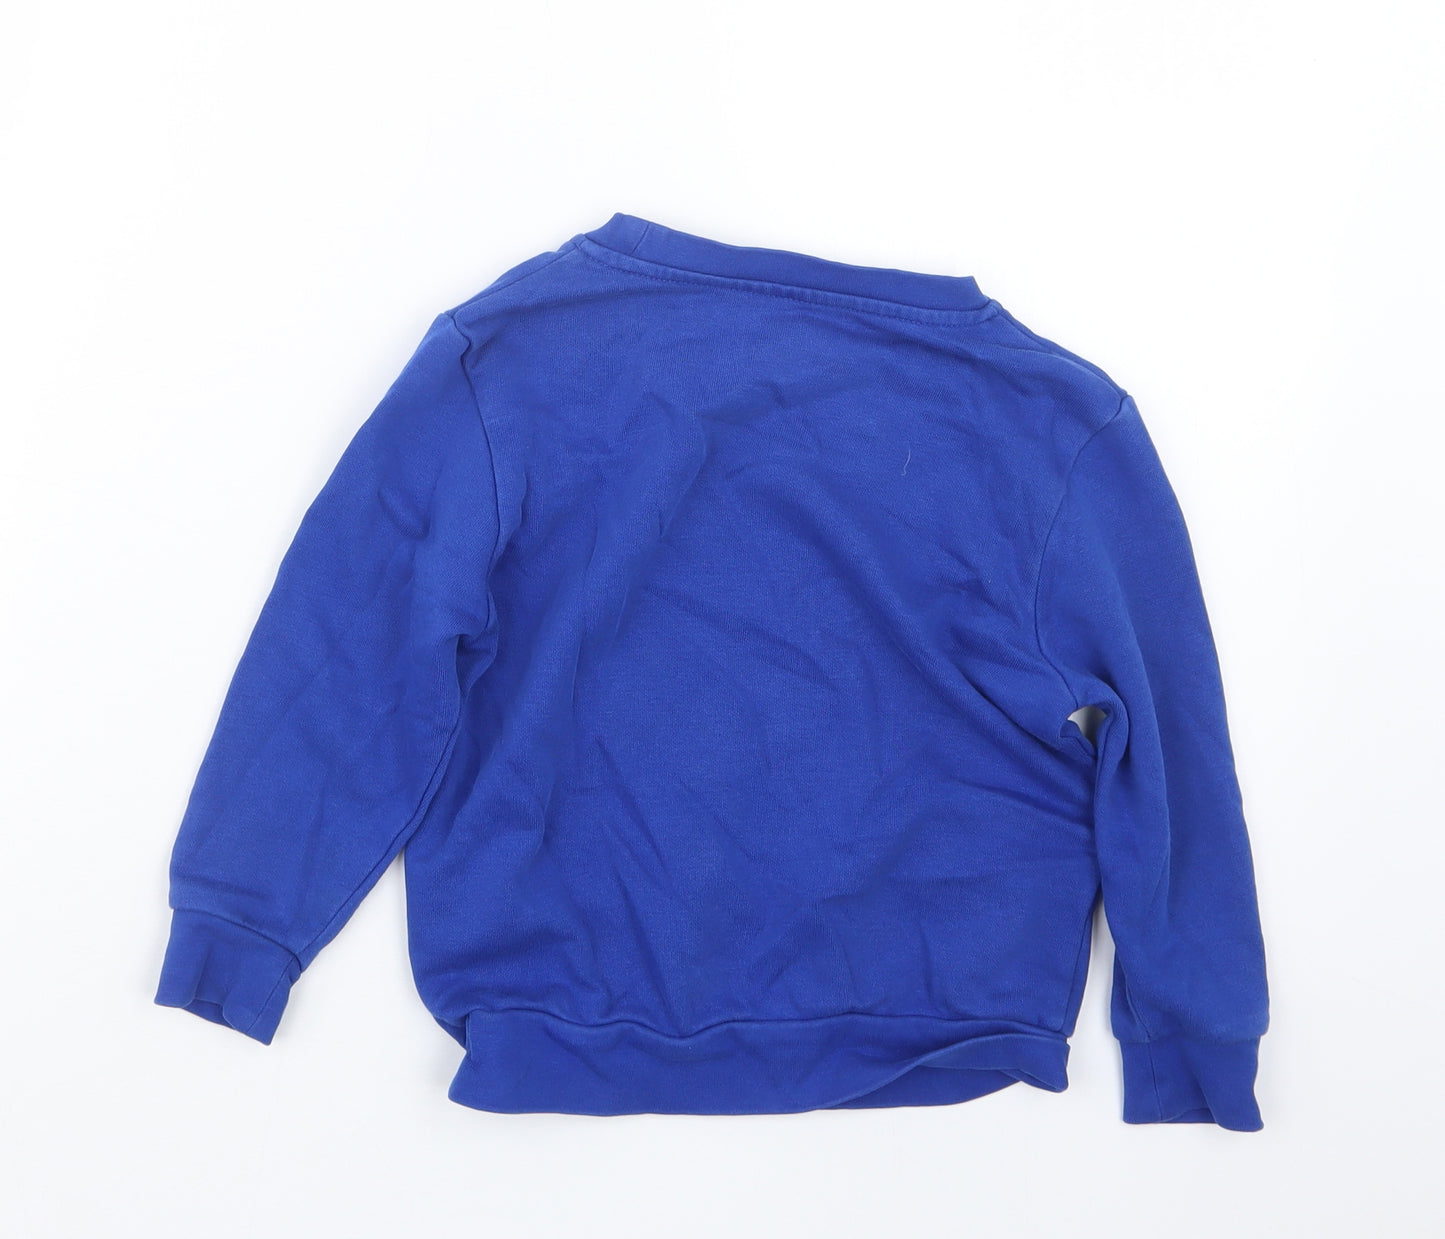 George Boys Blue   Pullover Jumper Size 3-4 Years